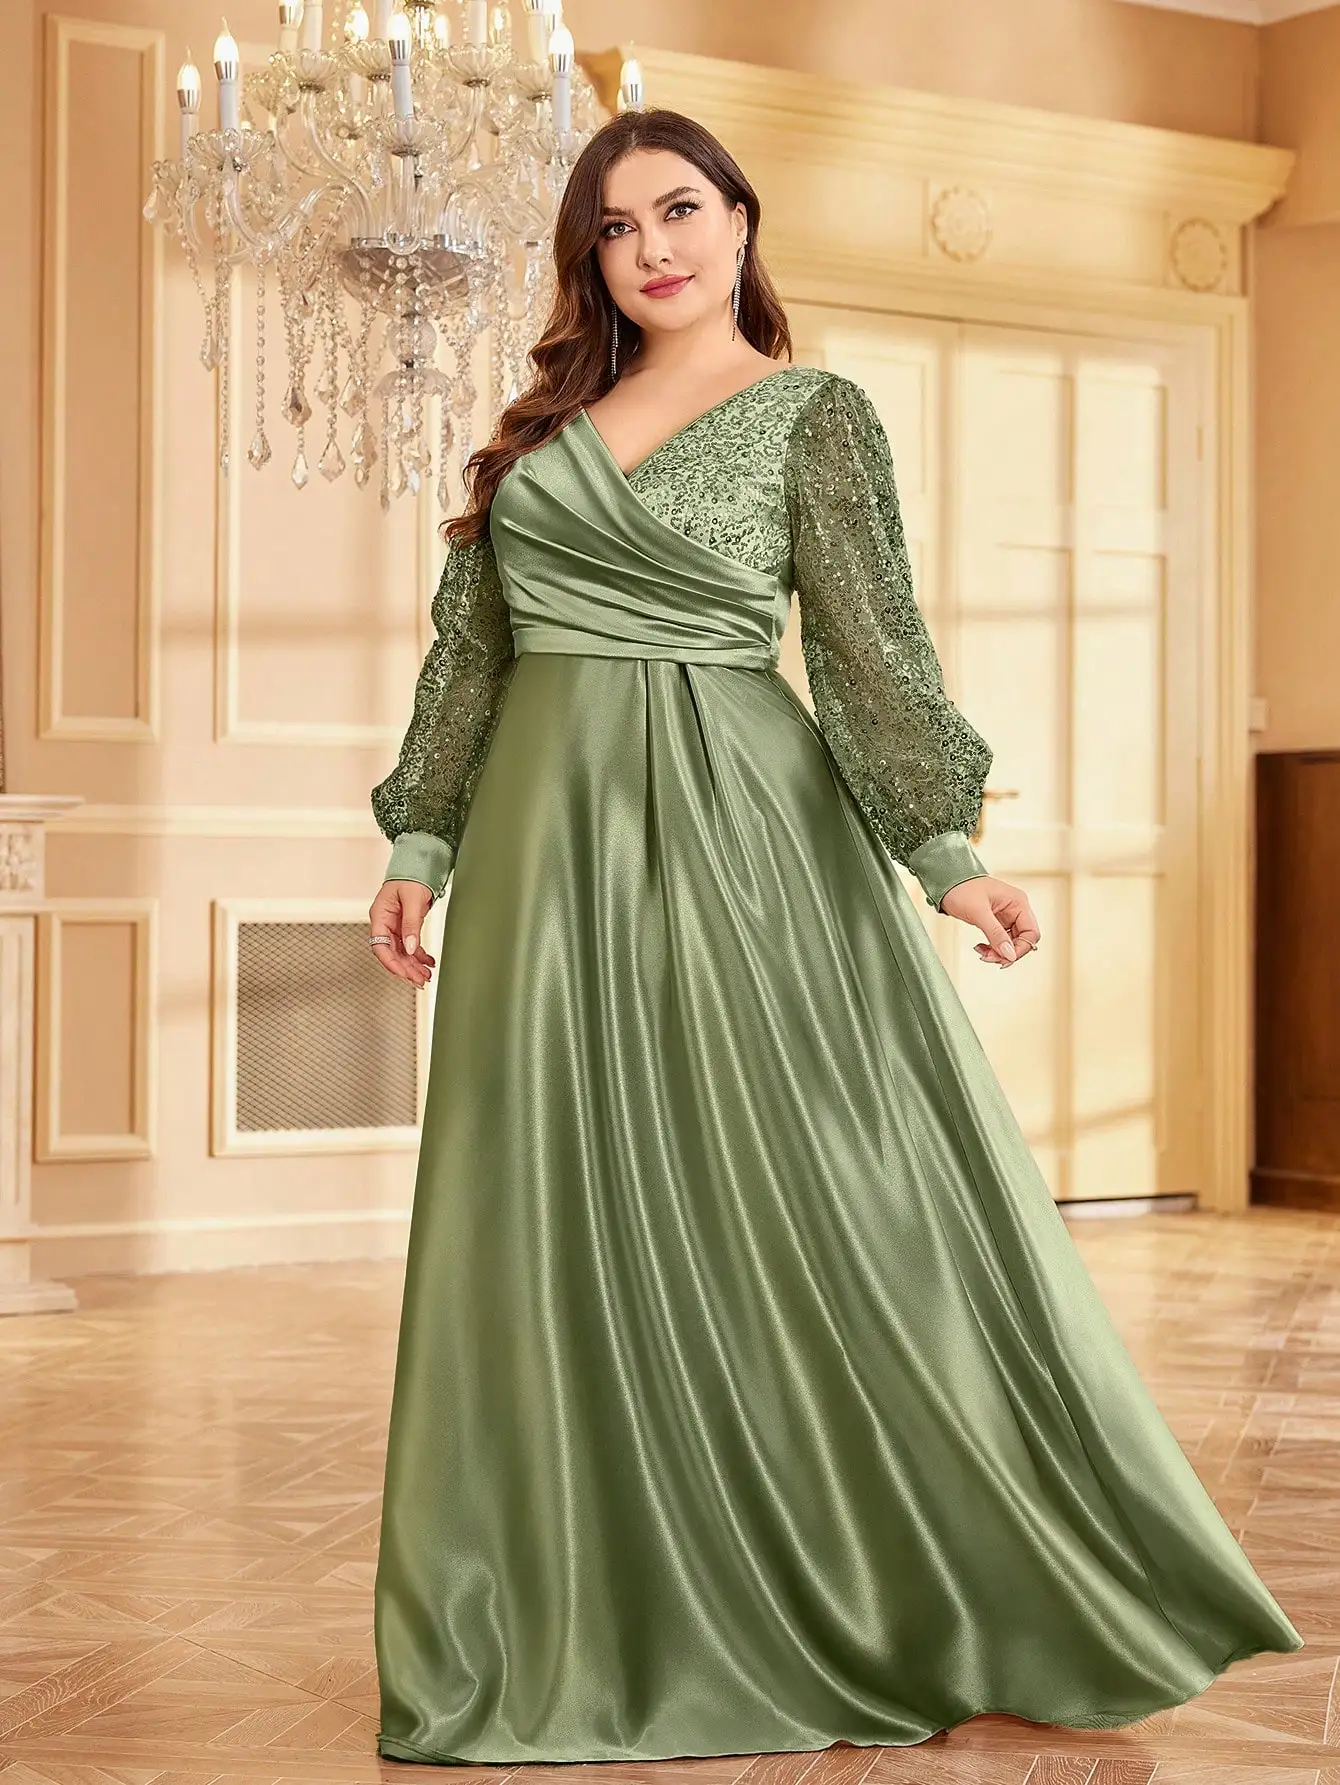 

Lucyinlove Plus Size Luxury Green V-Neck Sequin Evening Dress Elegant Women Party Maxi Dress Long Sleeve Cocktail Dress Prom